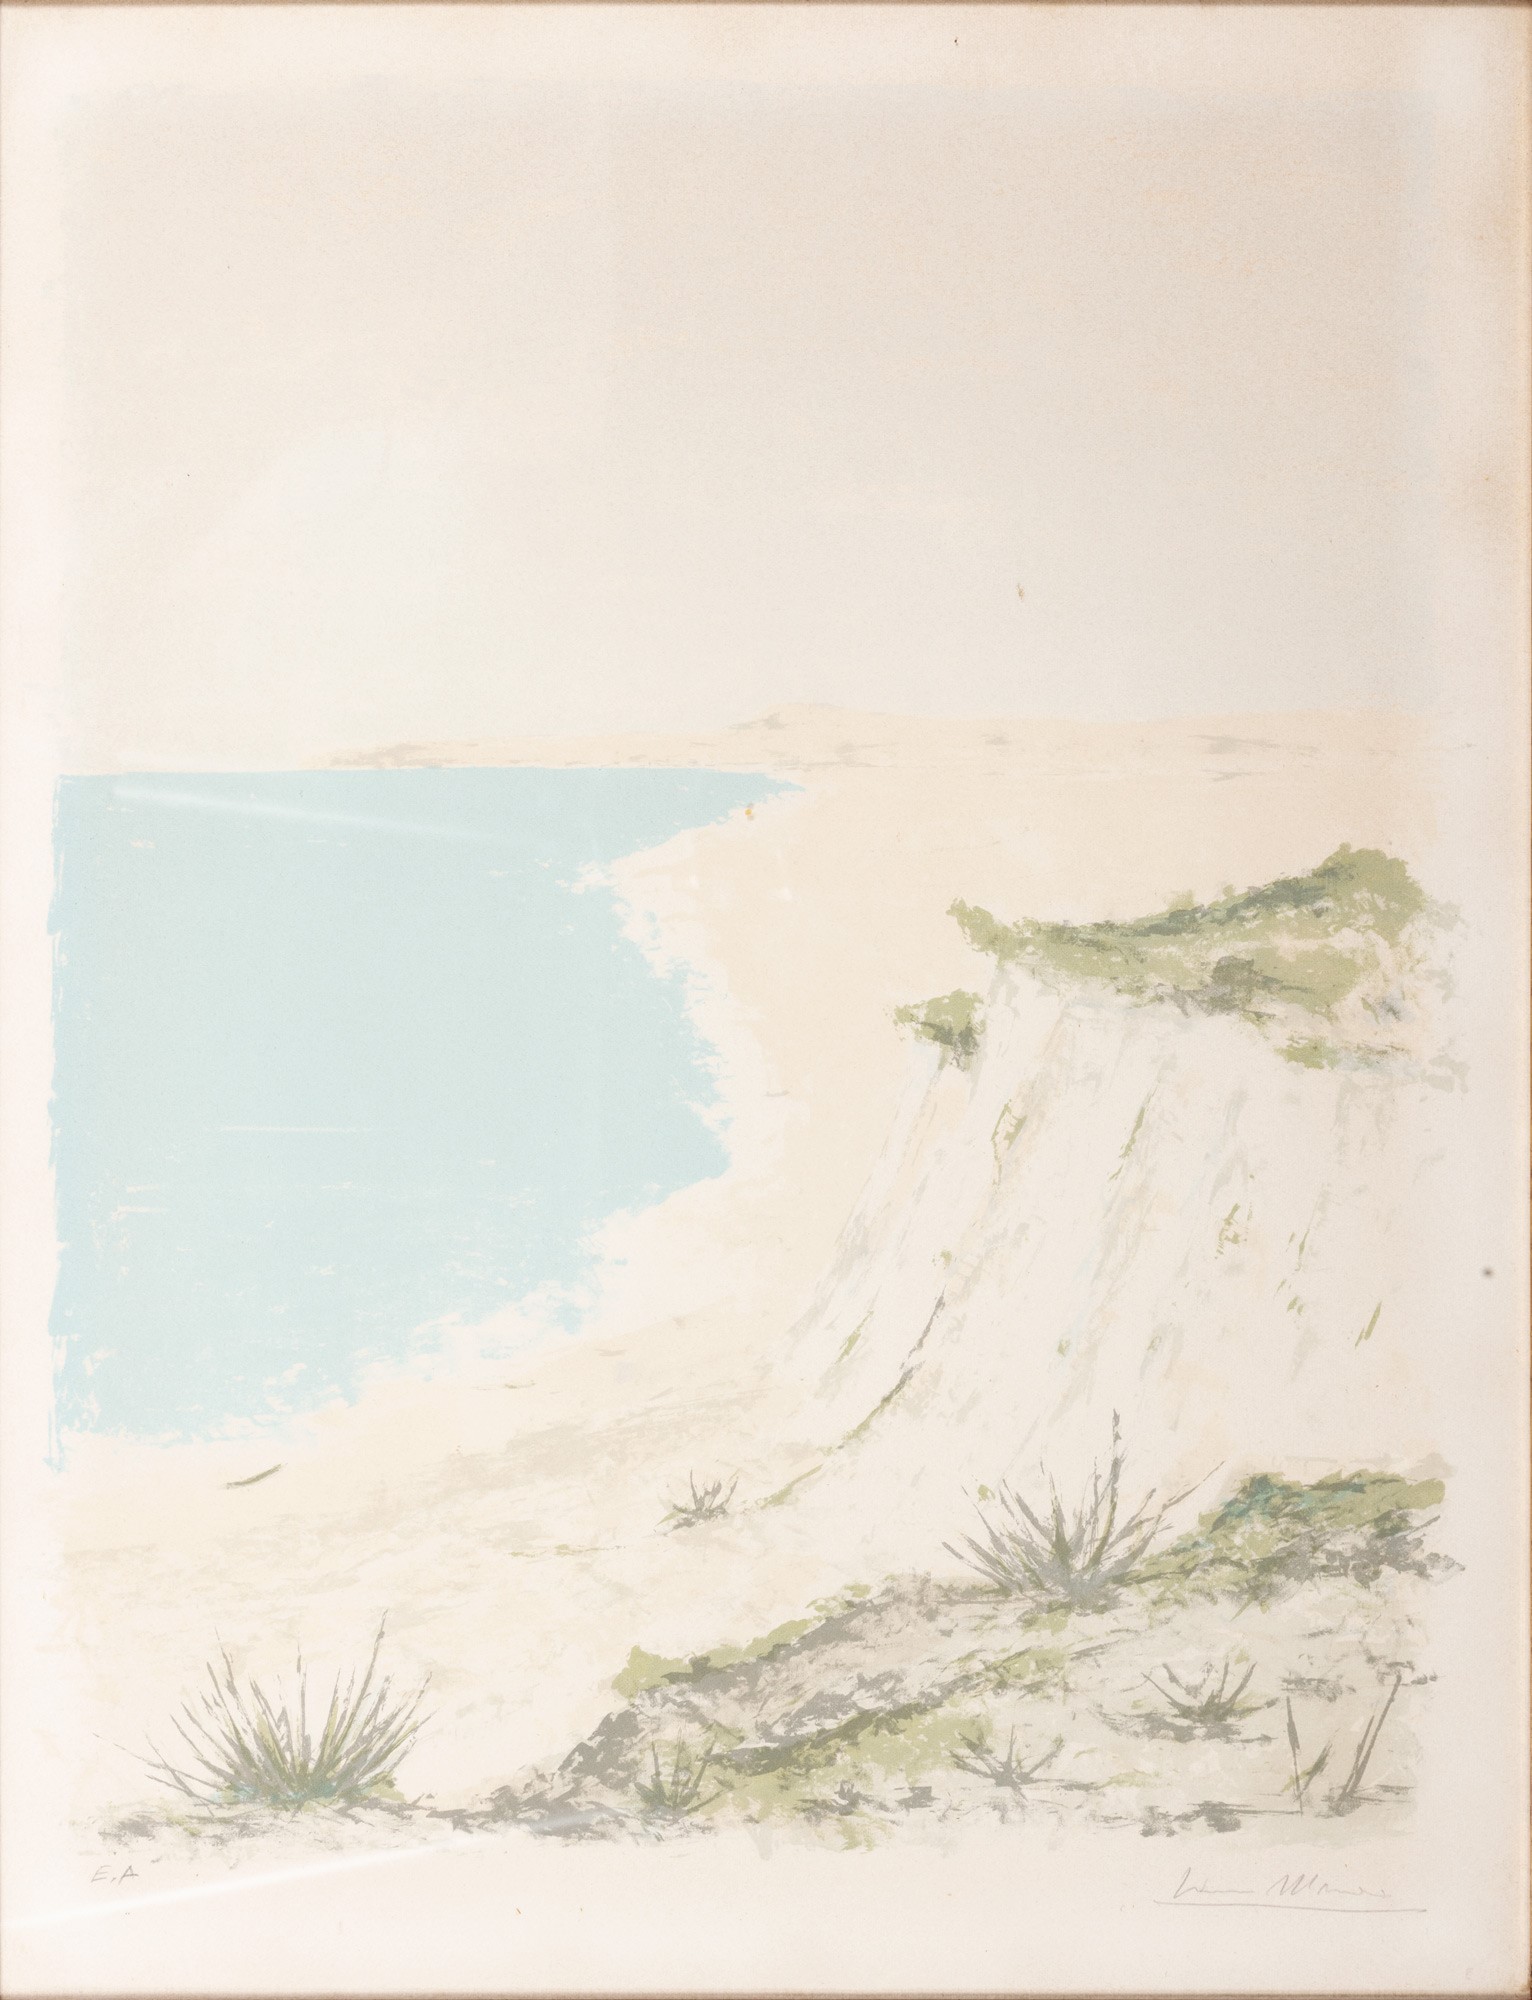 Glimpse of the coast 20th century, lithograph on paperE.A., signed in pencil, framed47 x 36 cm